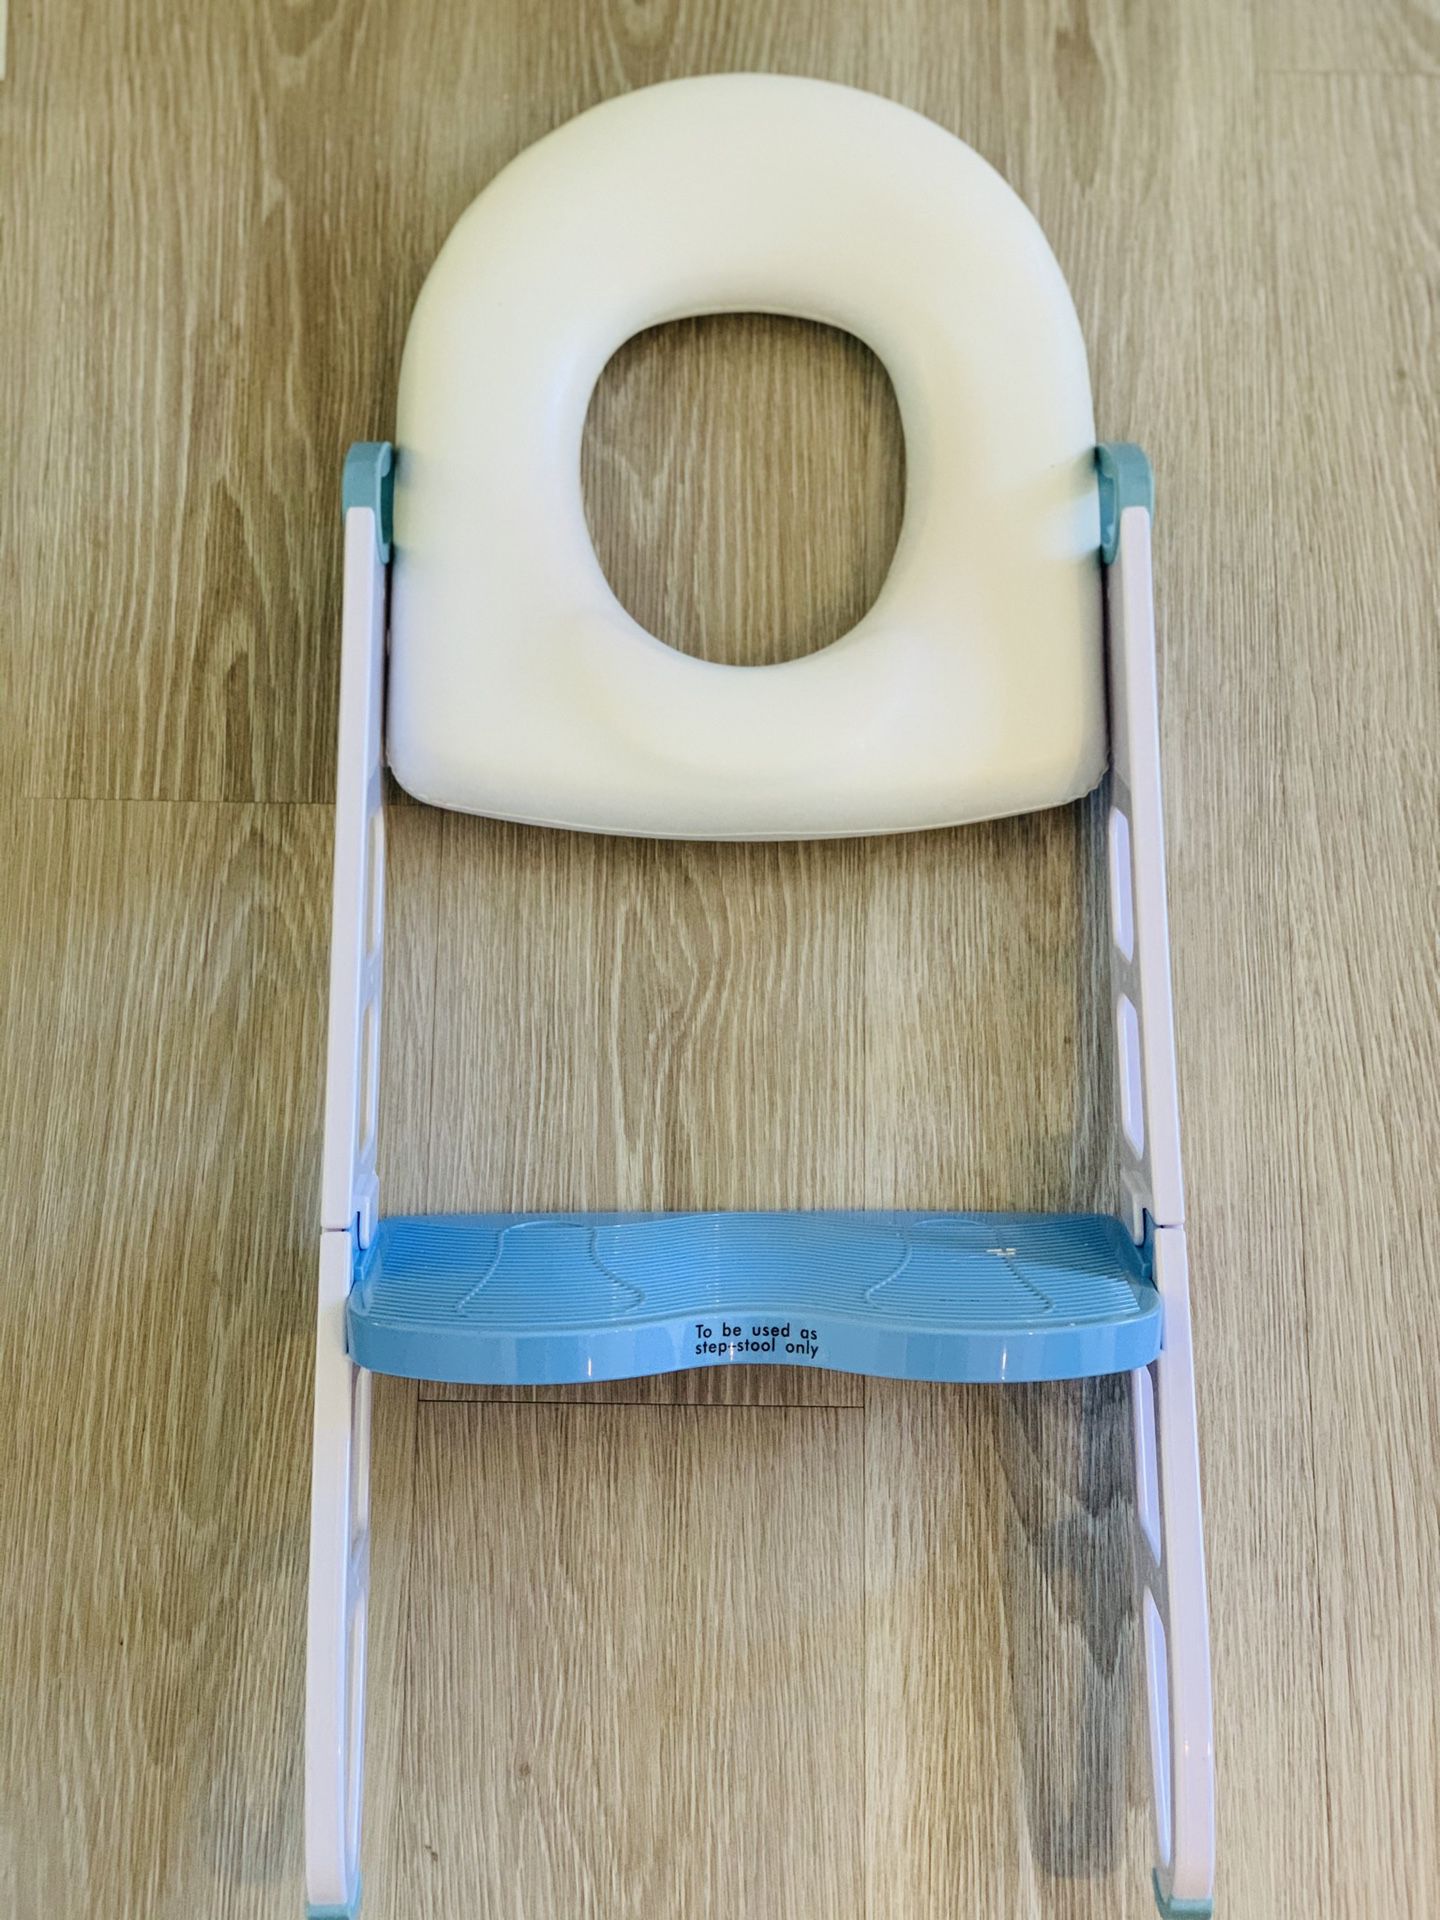 Toddle potty chair step stool